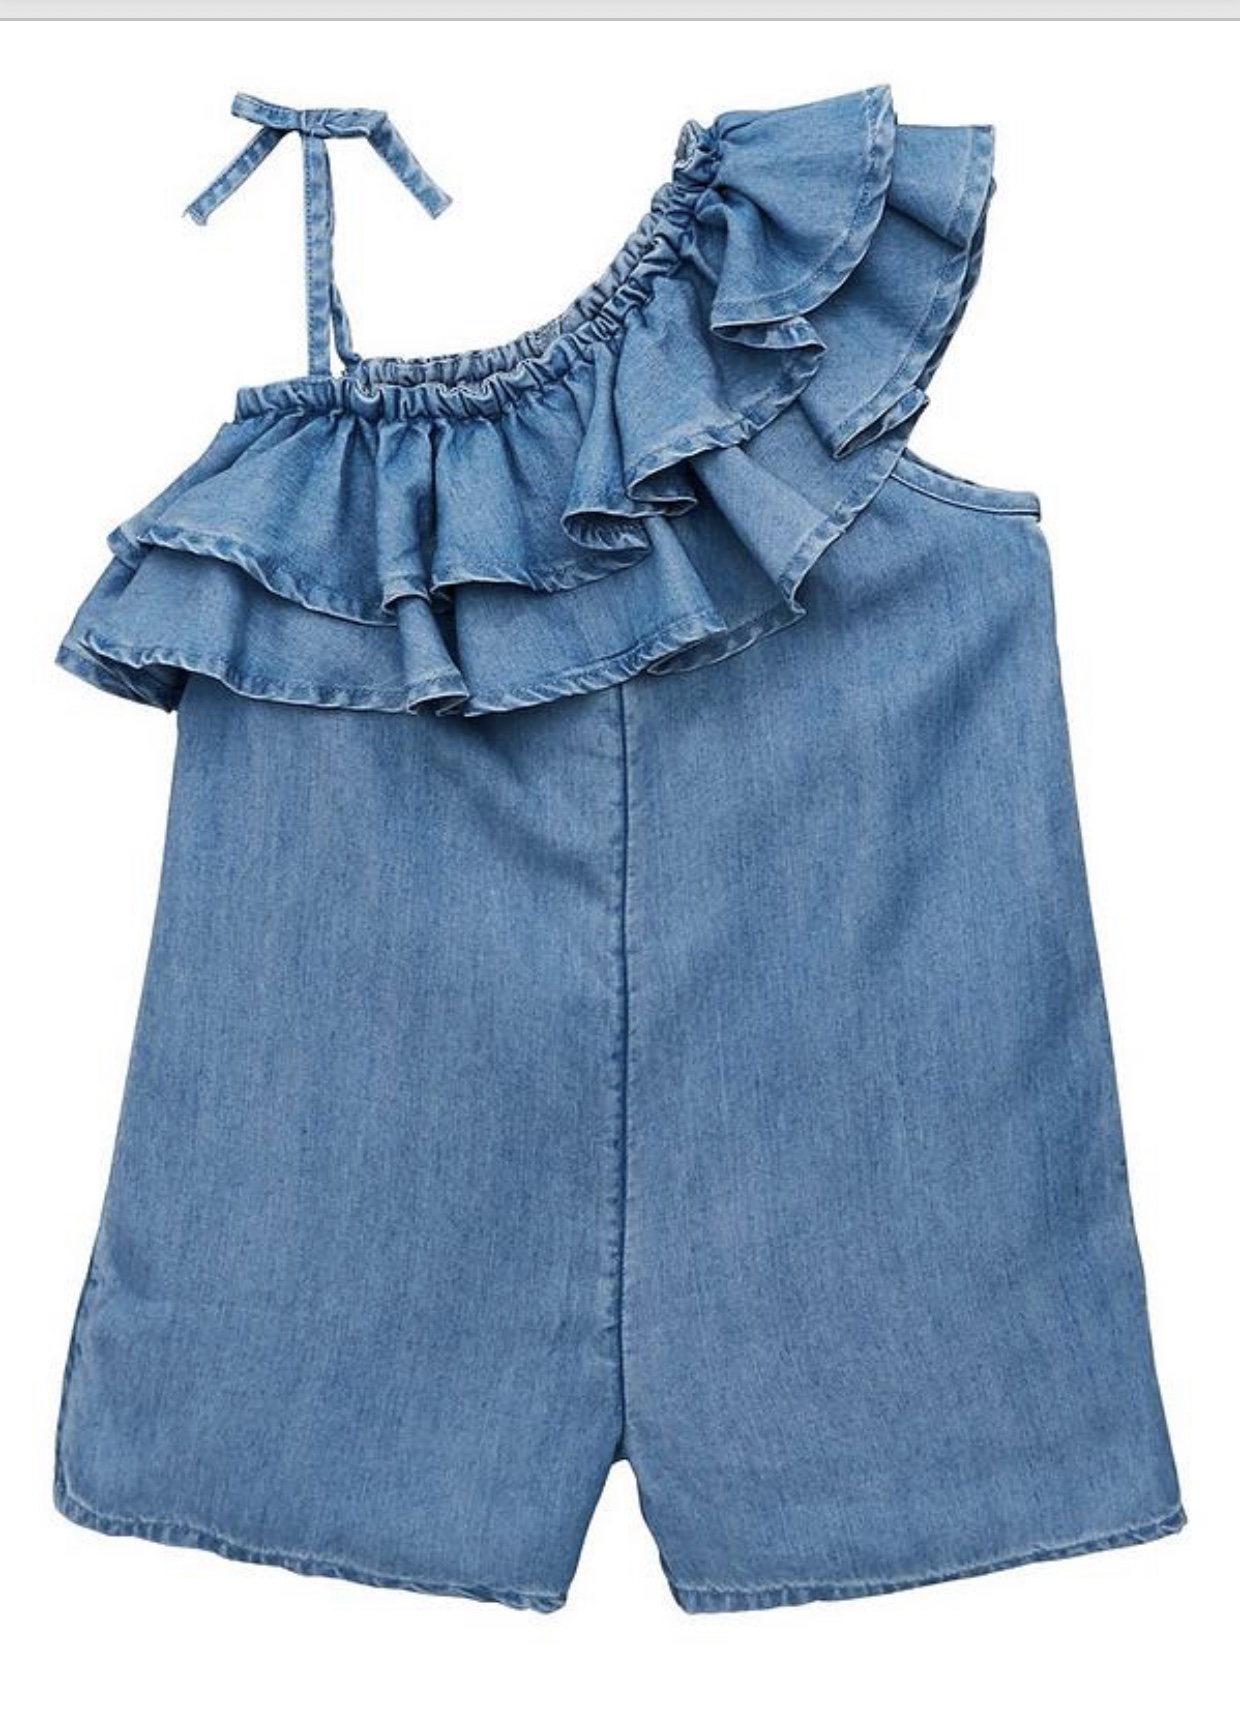 I can't wait to twin / triple with the girls in these and the bardot denim dress!